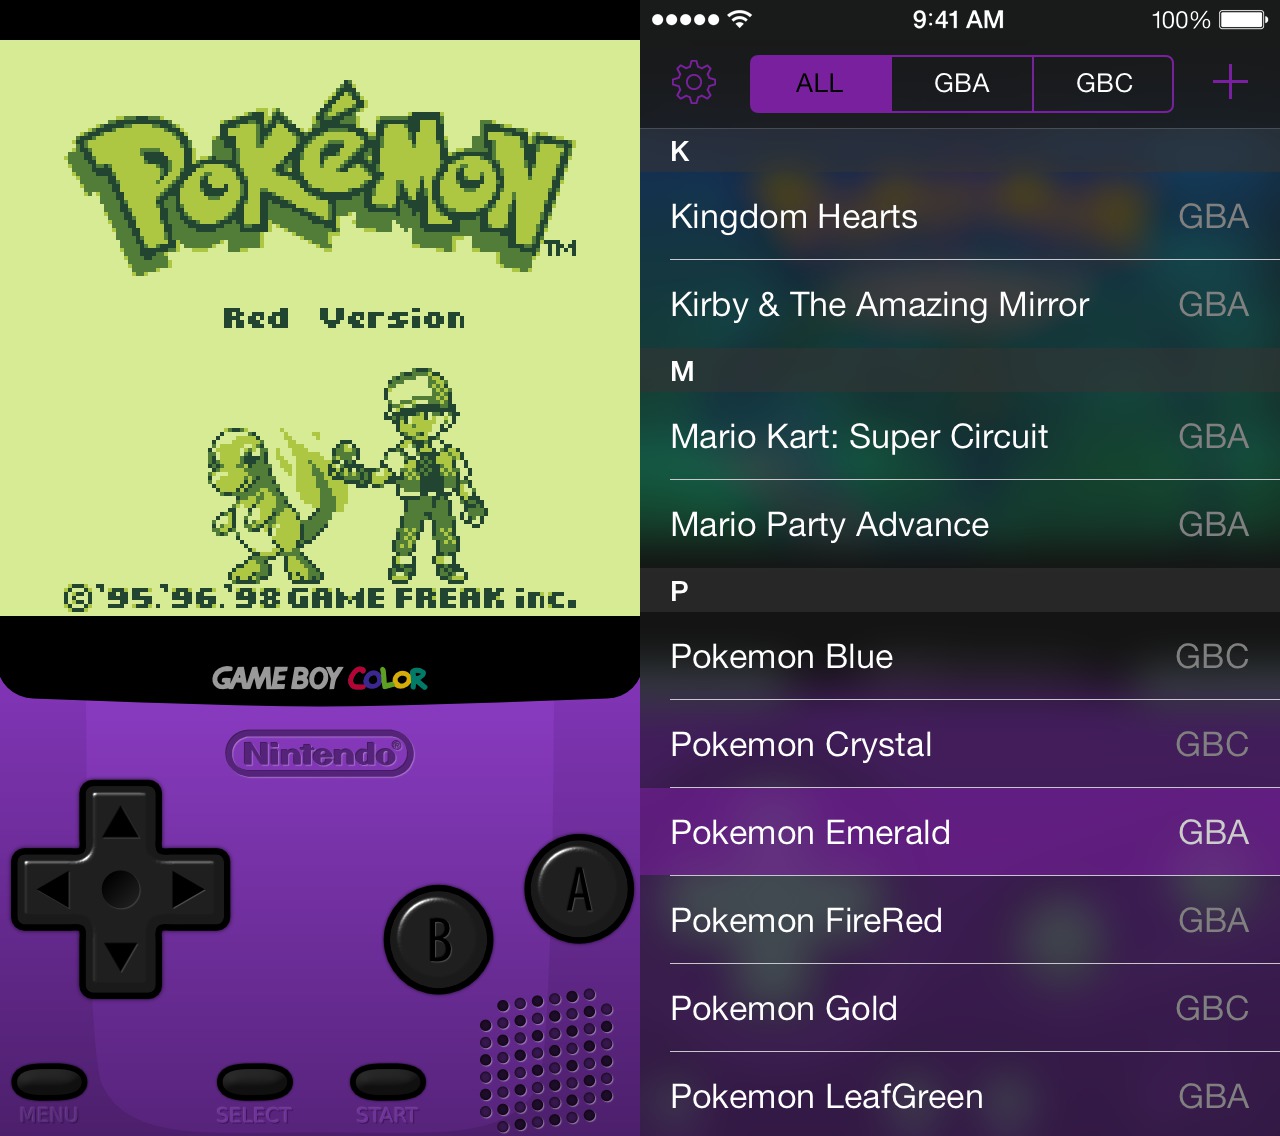 NEW Install GBA Emulator Without iOS 7.0.4 Jailbreak FREE Gba4iOS